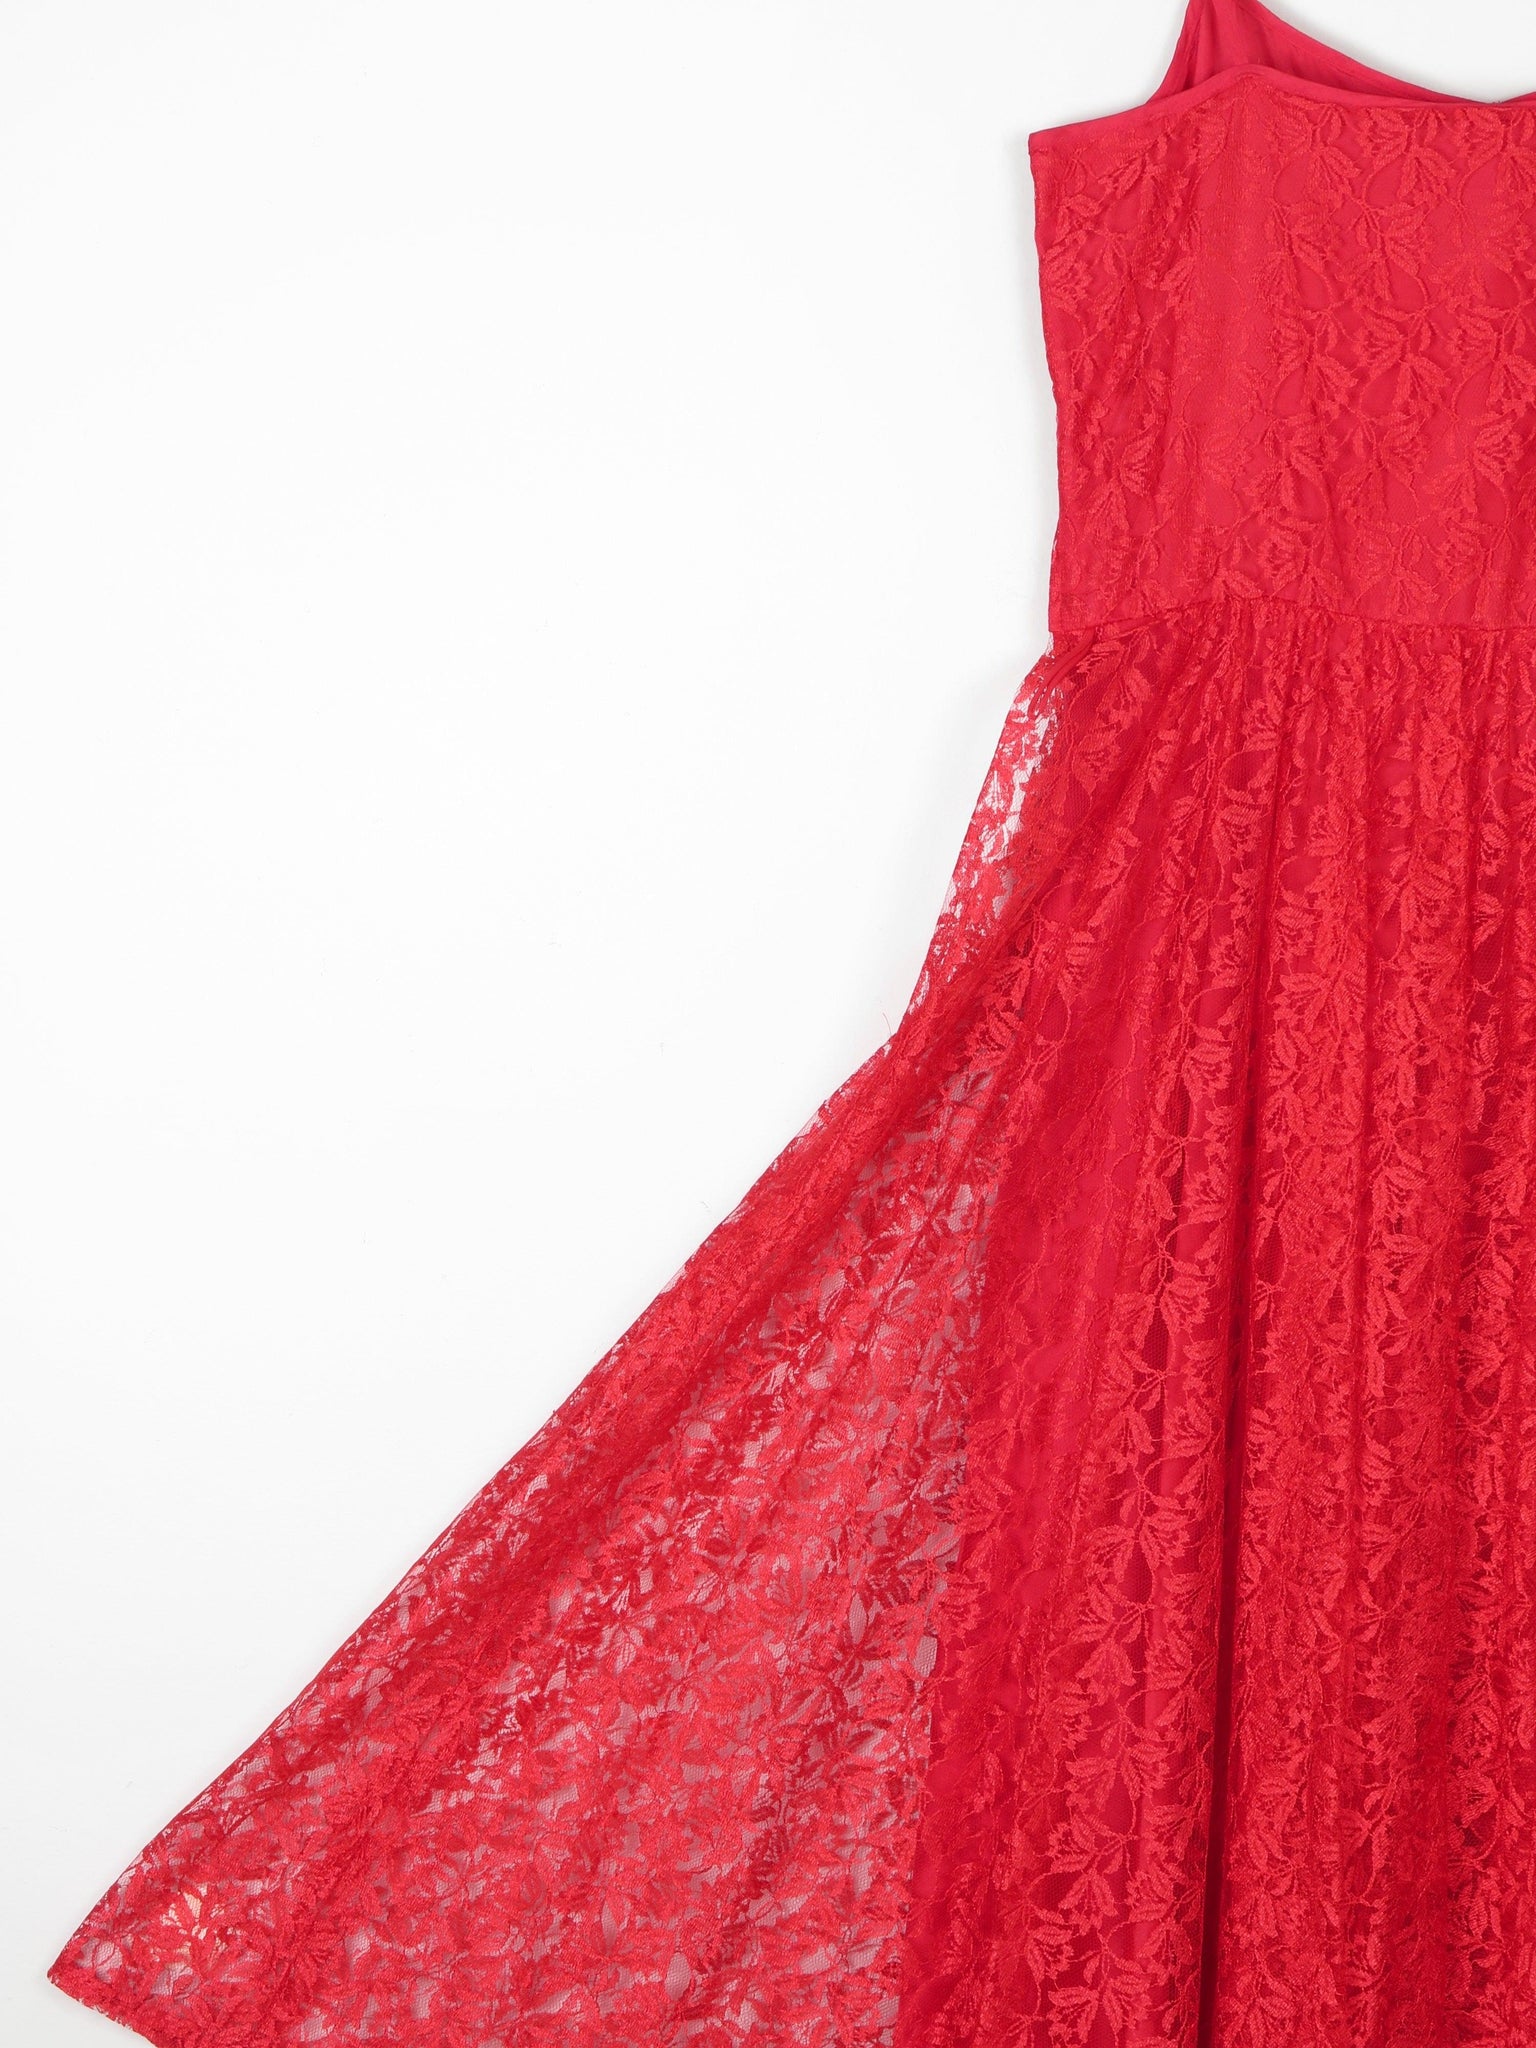 Red Lace & Sequin 1950s Style Fit & Flare Dress 6/8 - The Harlequin